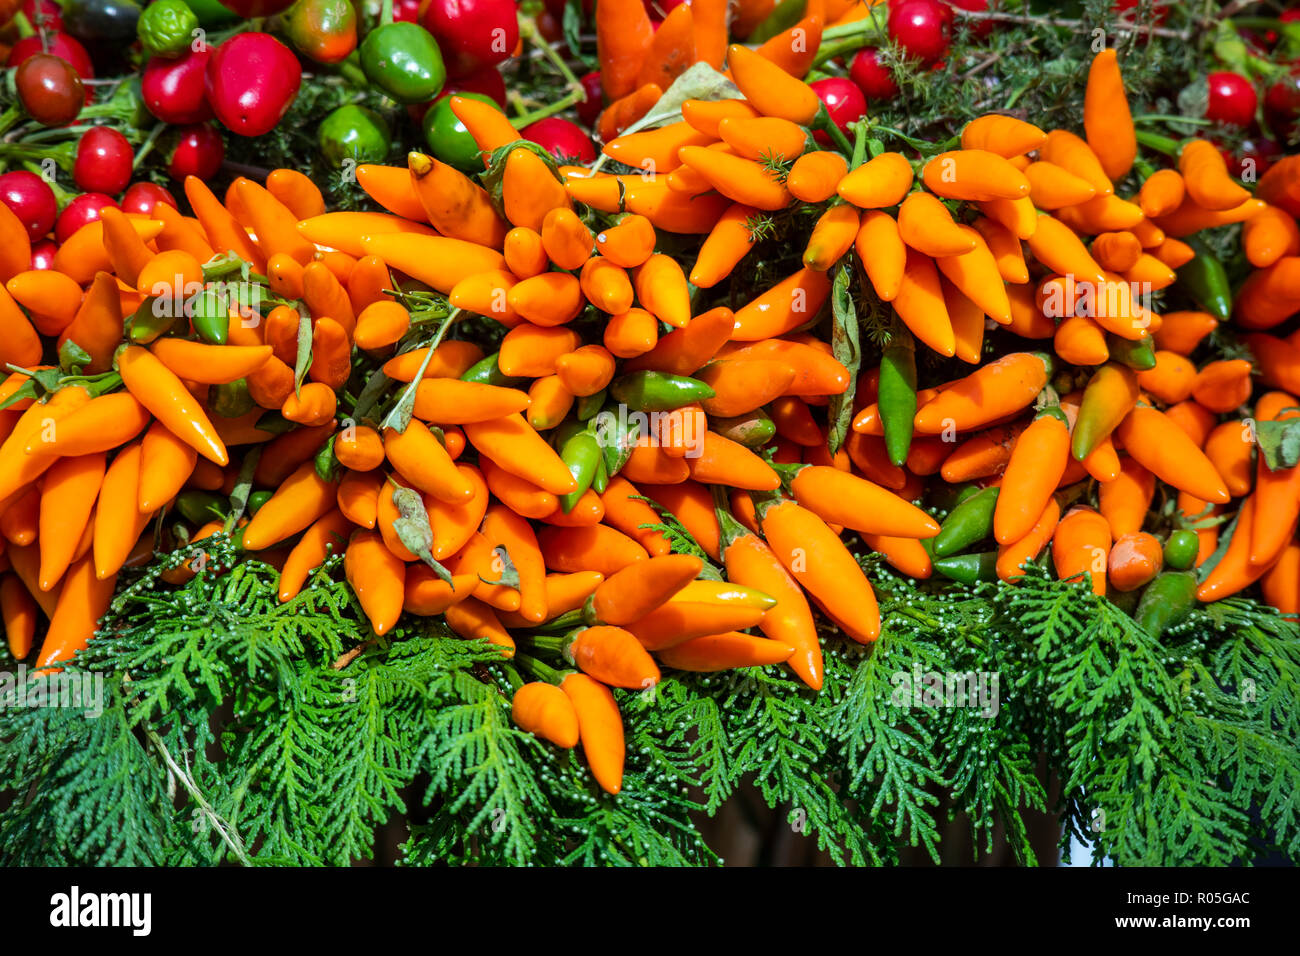 colorful variety of peppers Stock Photo